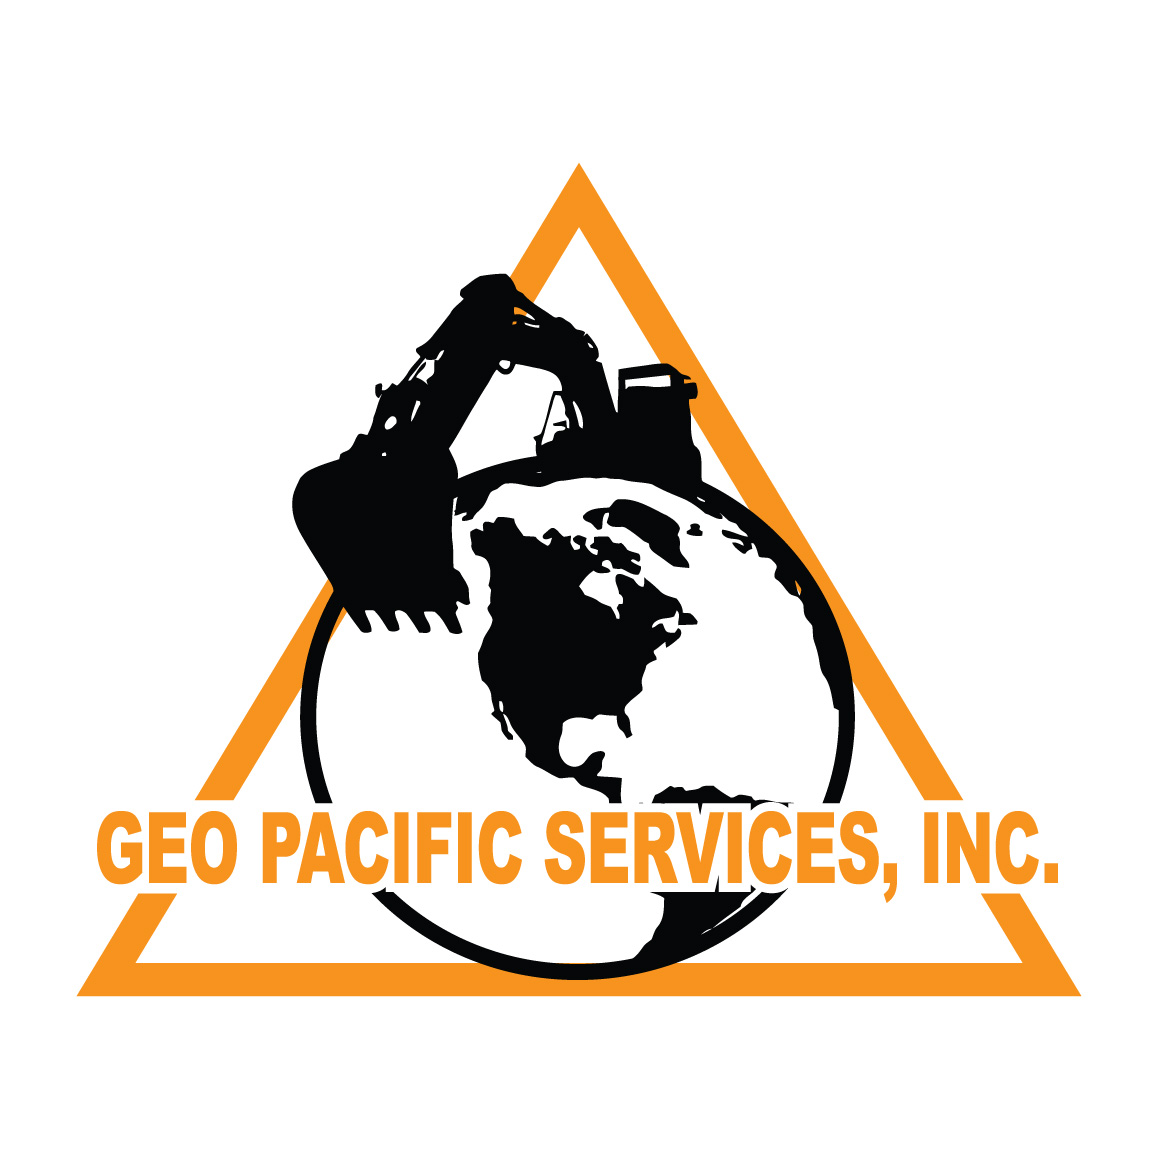 GEO PACIFIC SERVICES Good Catch